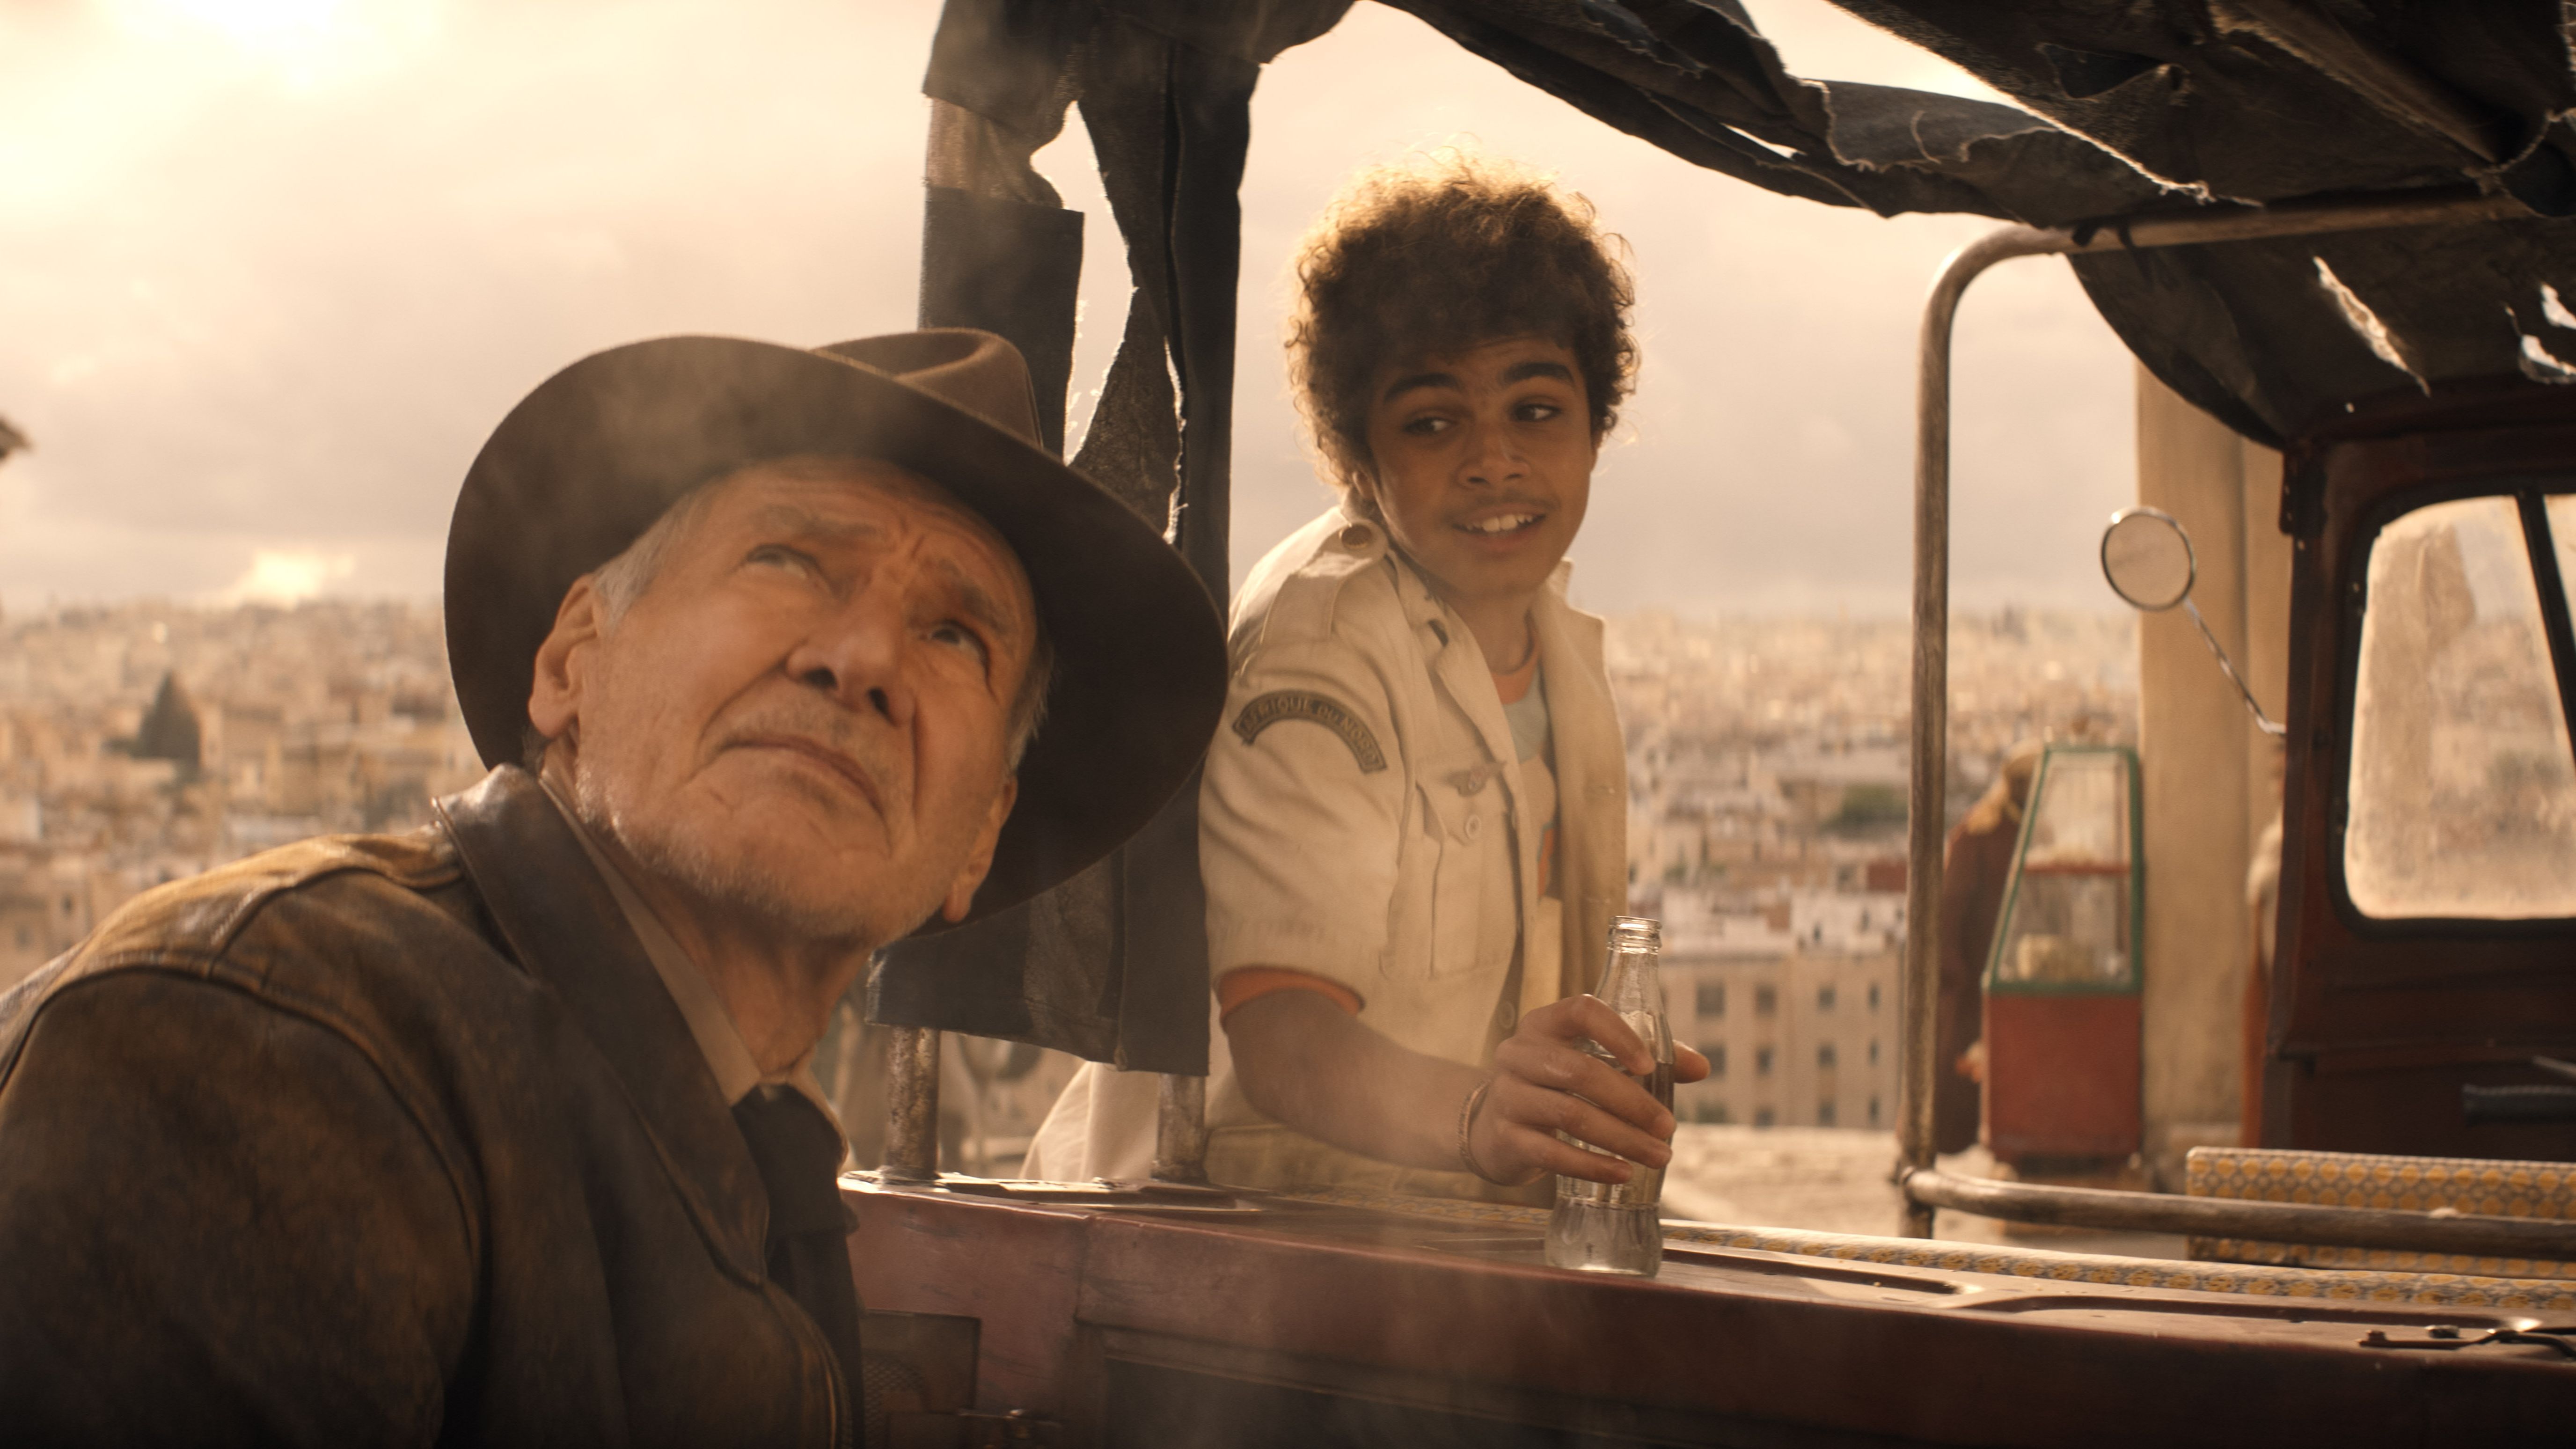 Indiana Jones 5' Streaming on Disney Plus: Release Date and Time - CNET